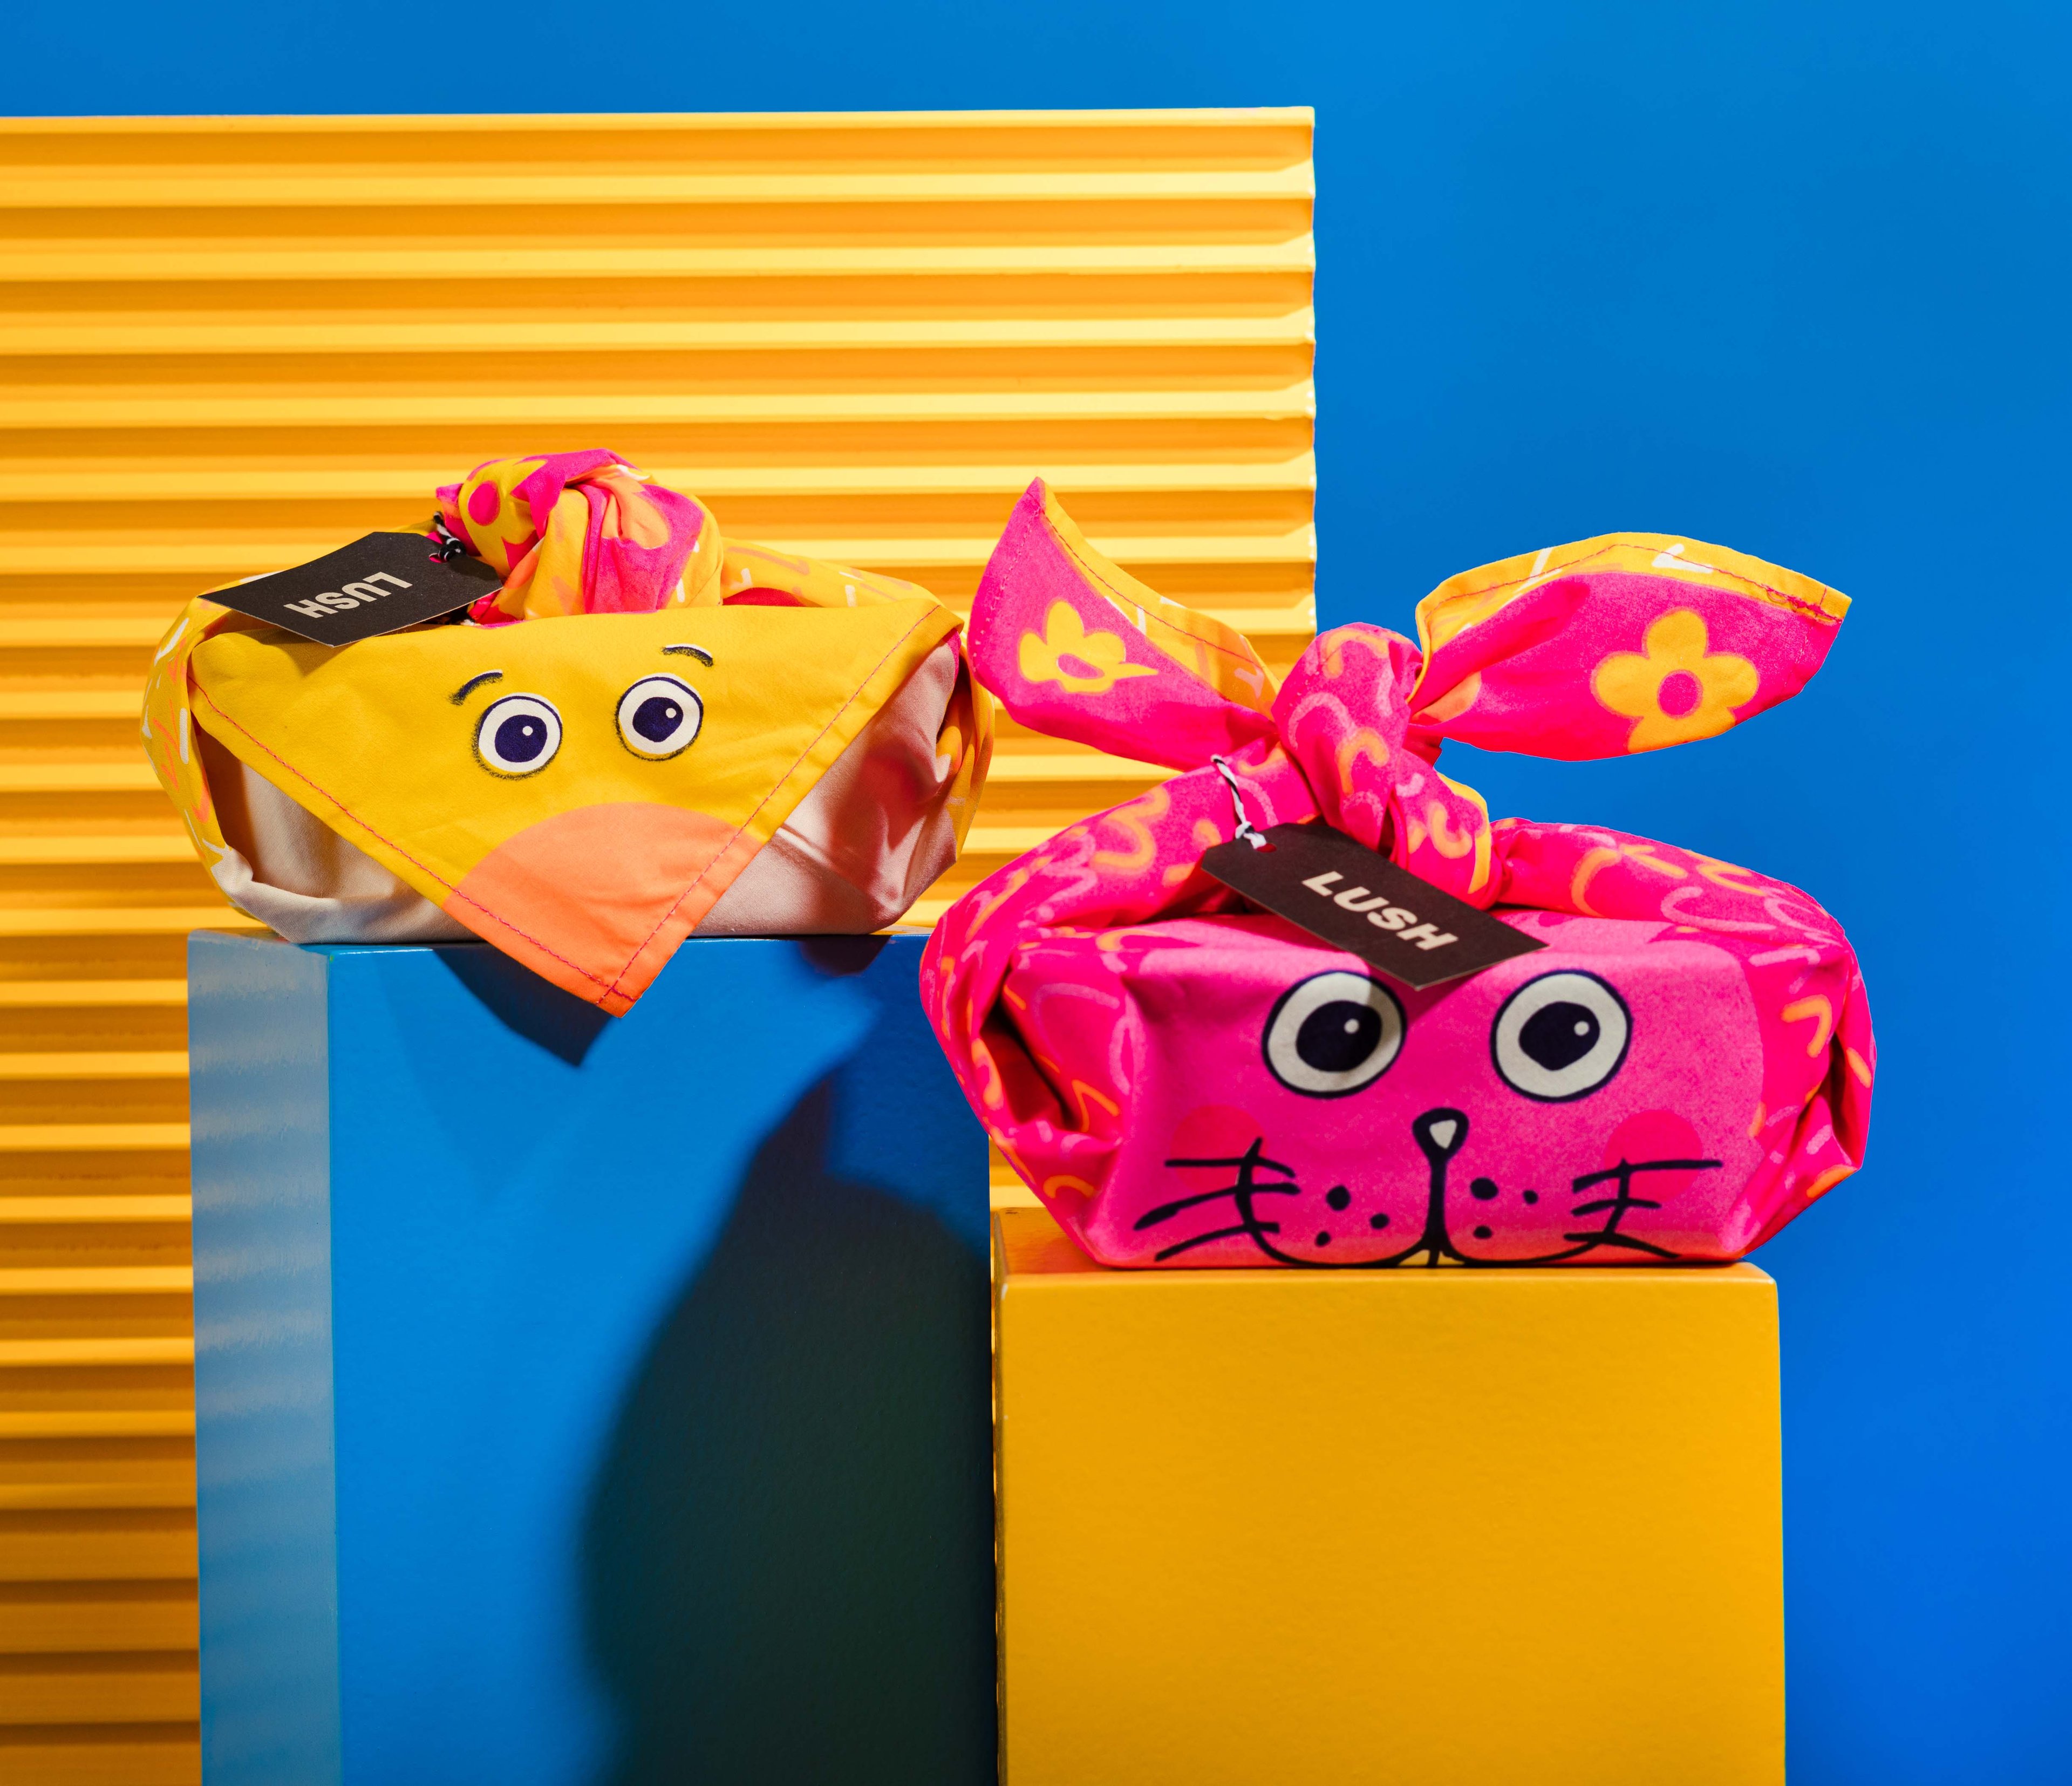 The Knot Wrap is shown wrapped, one with the bird face, the other with a rabbit face. In front of yellow and blue background.